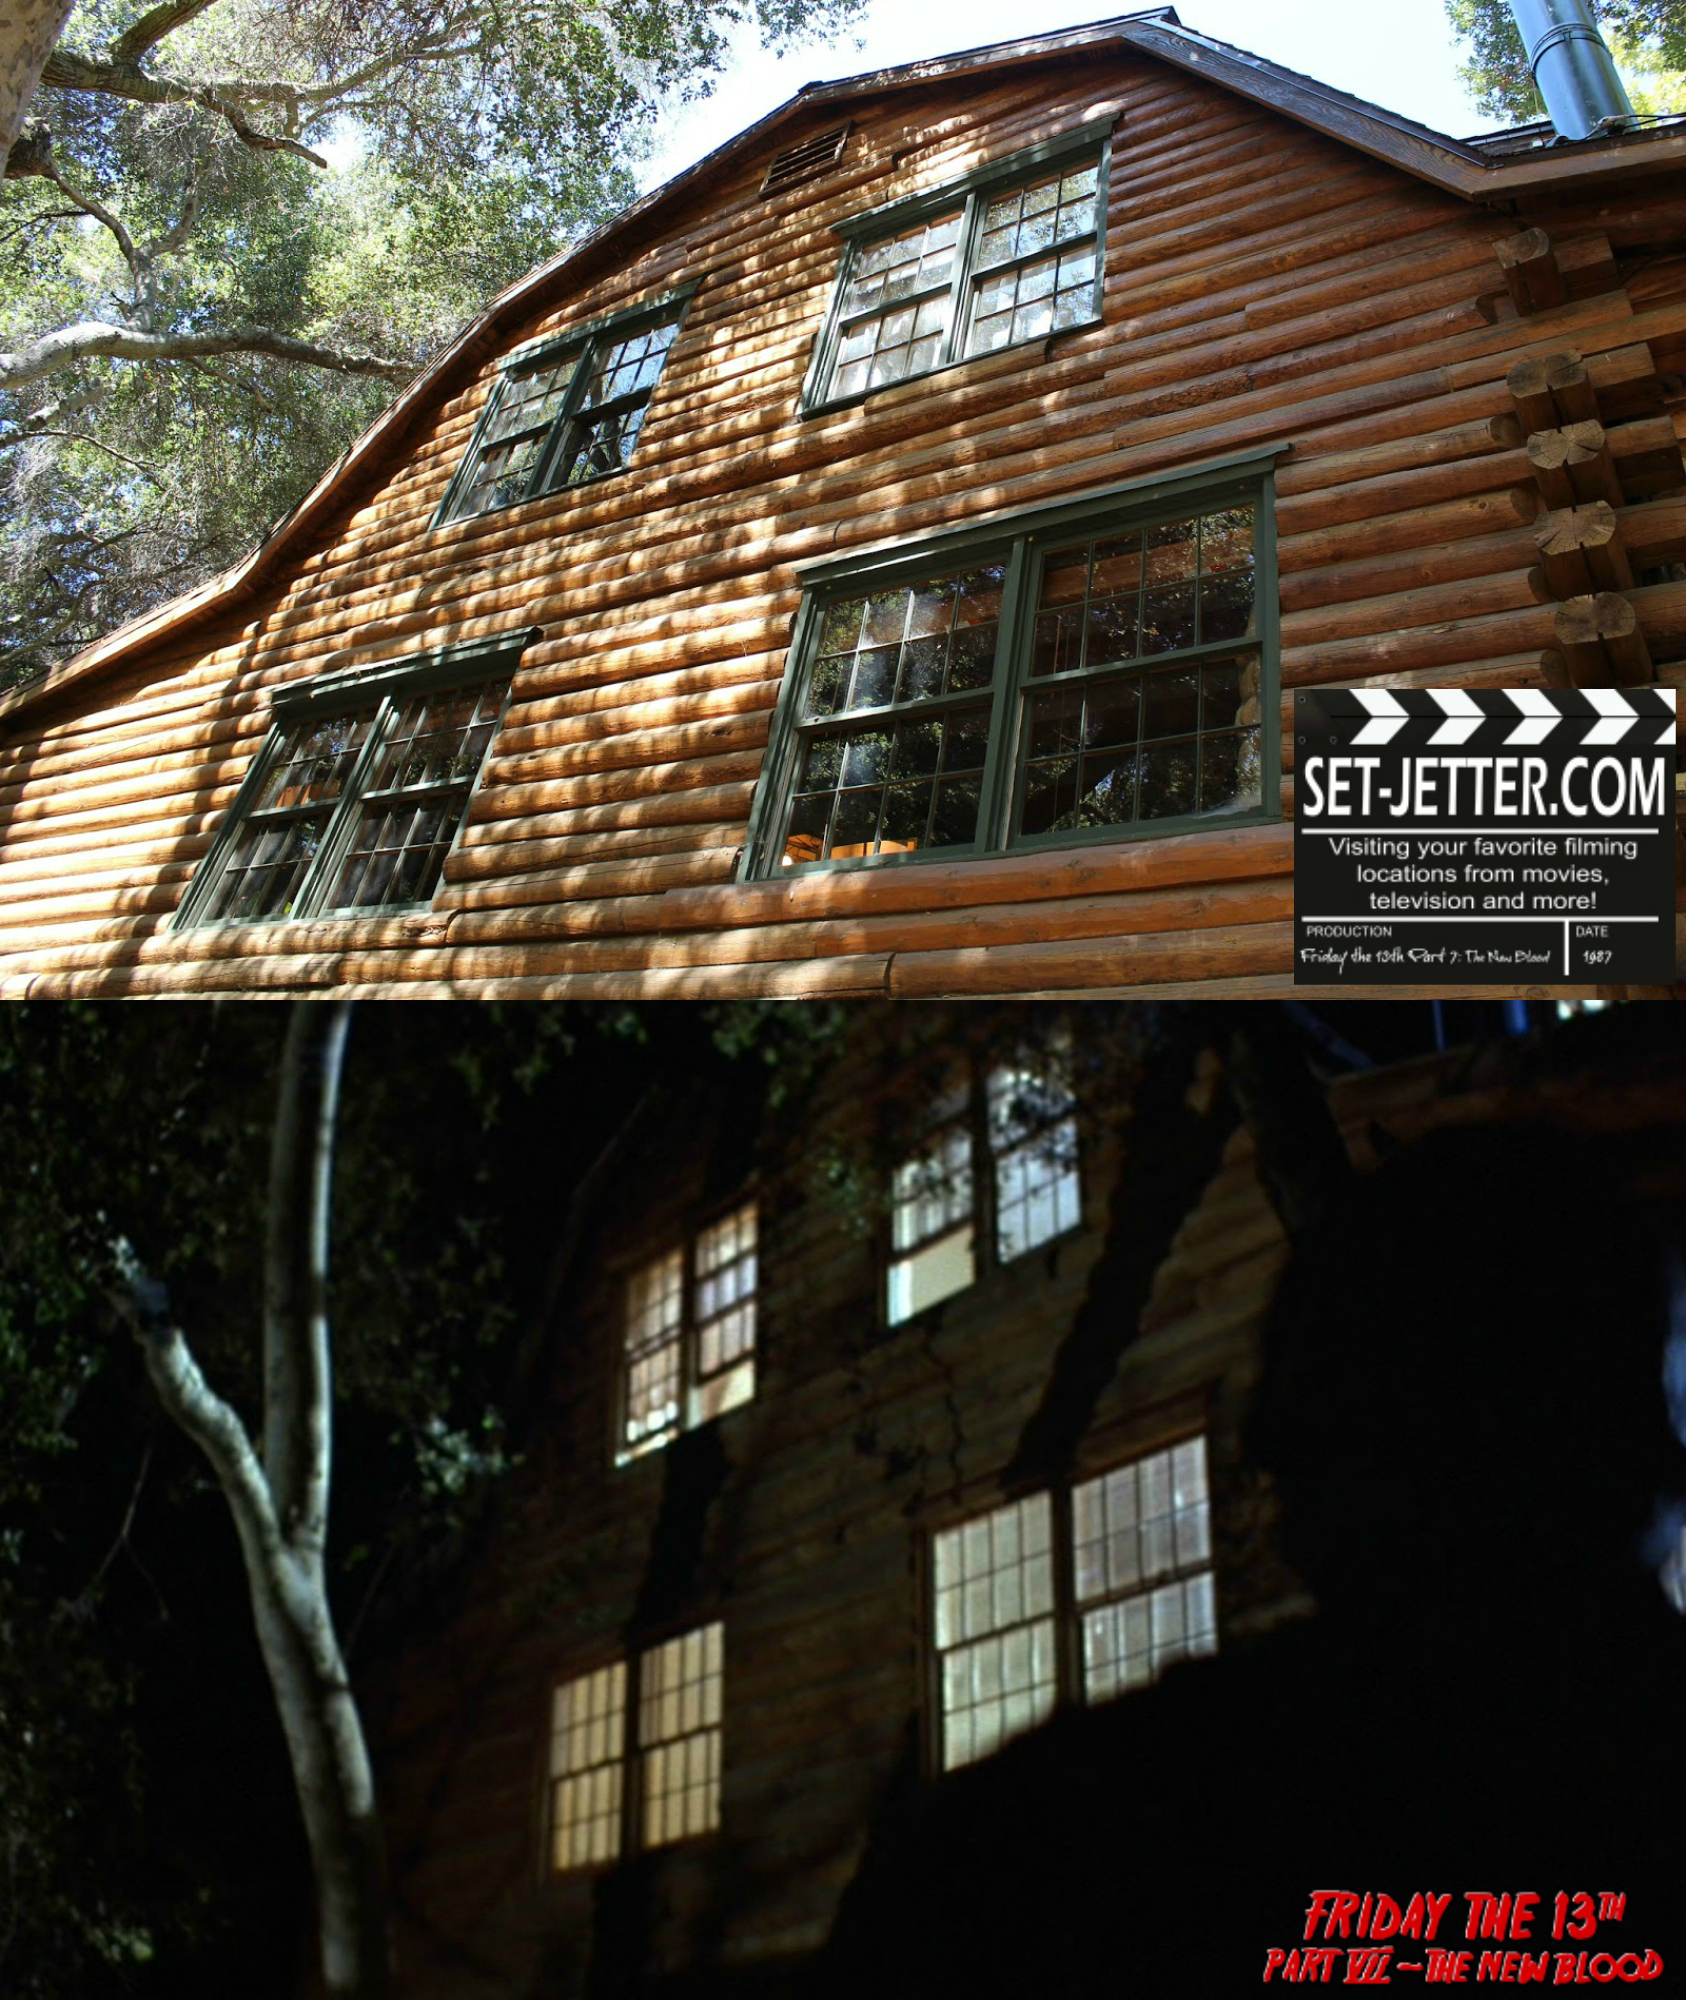 Friday the 13th Part VII comparison 02.jpg